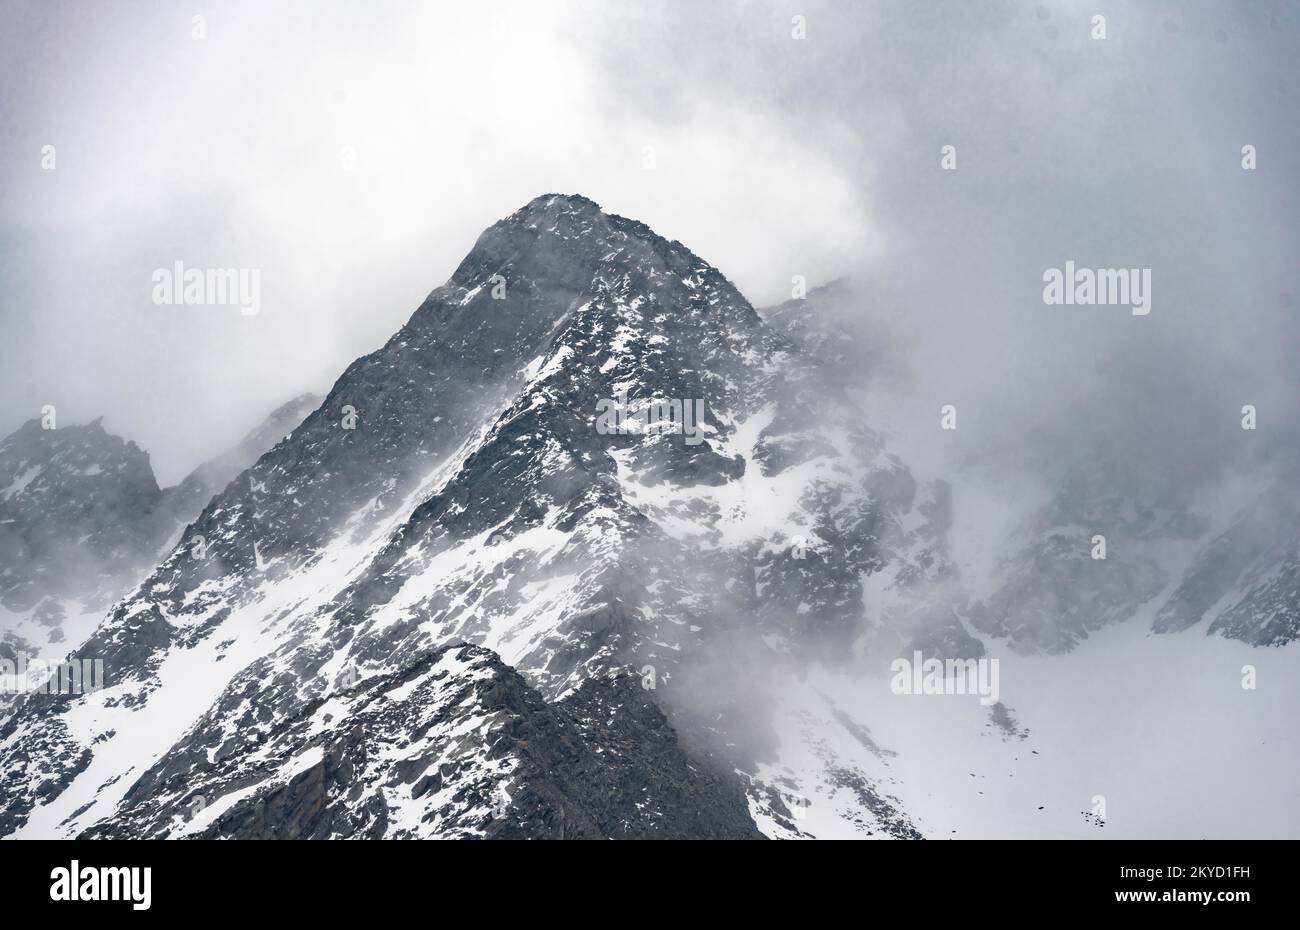 Mountains in winter with clouds and fog, Neustift im Stubai Valley, Tyrol, Austria Stock Photo